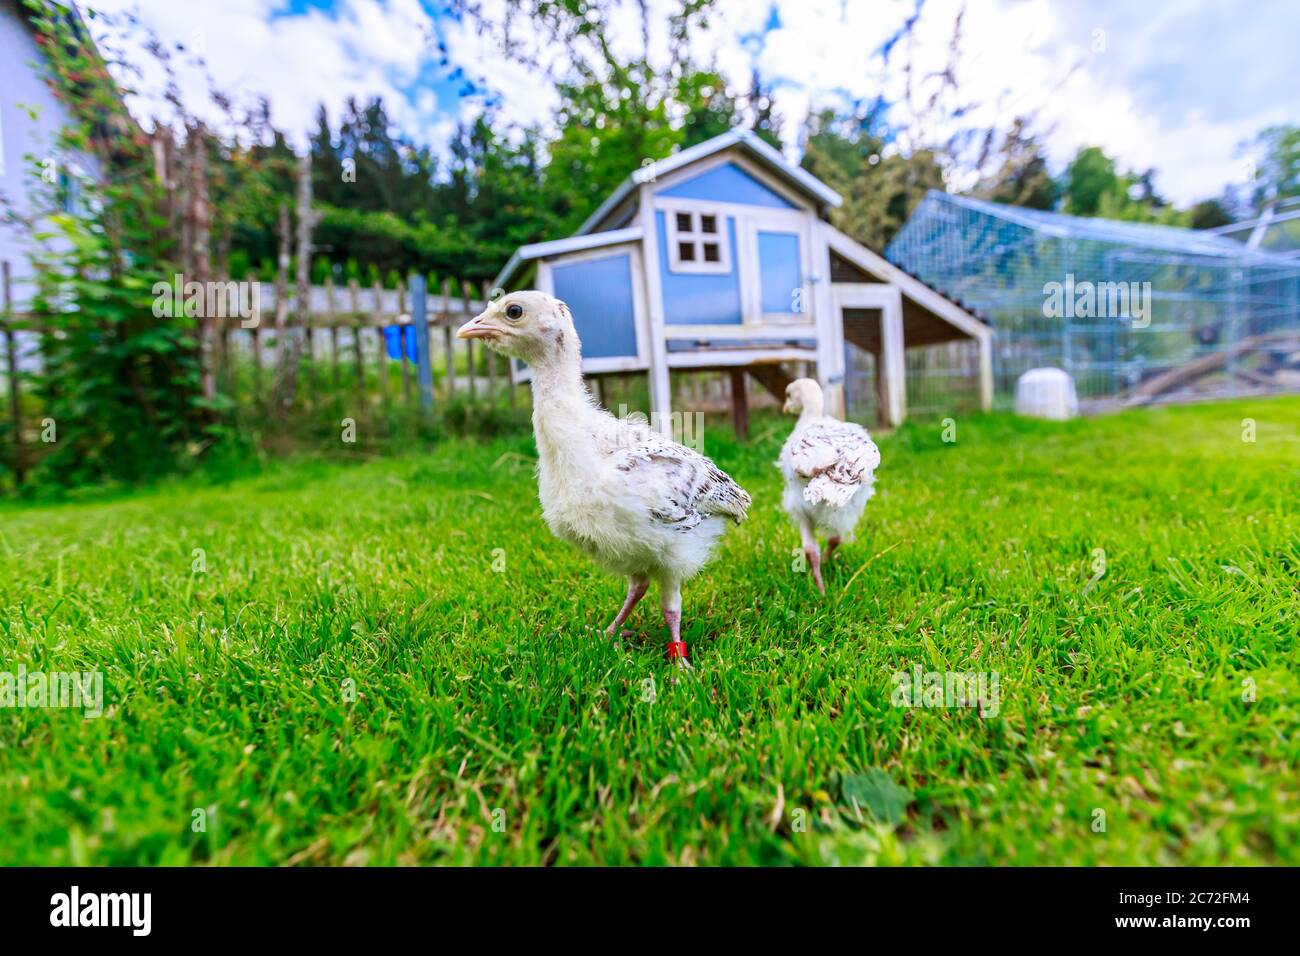 Two little pheasant chicks in front of a blue chicken house Stock Photo